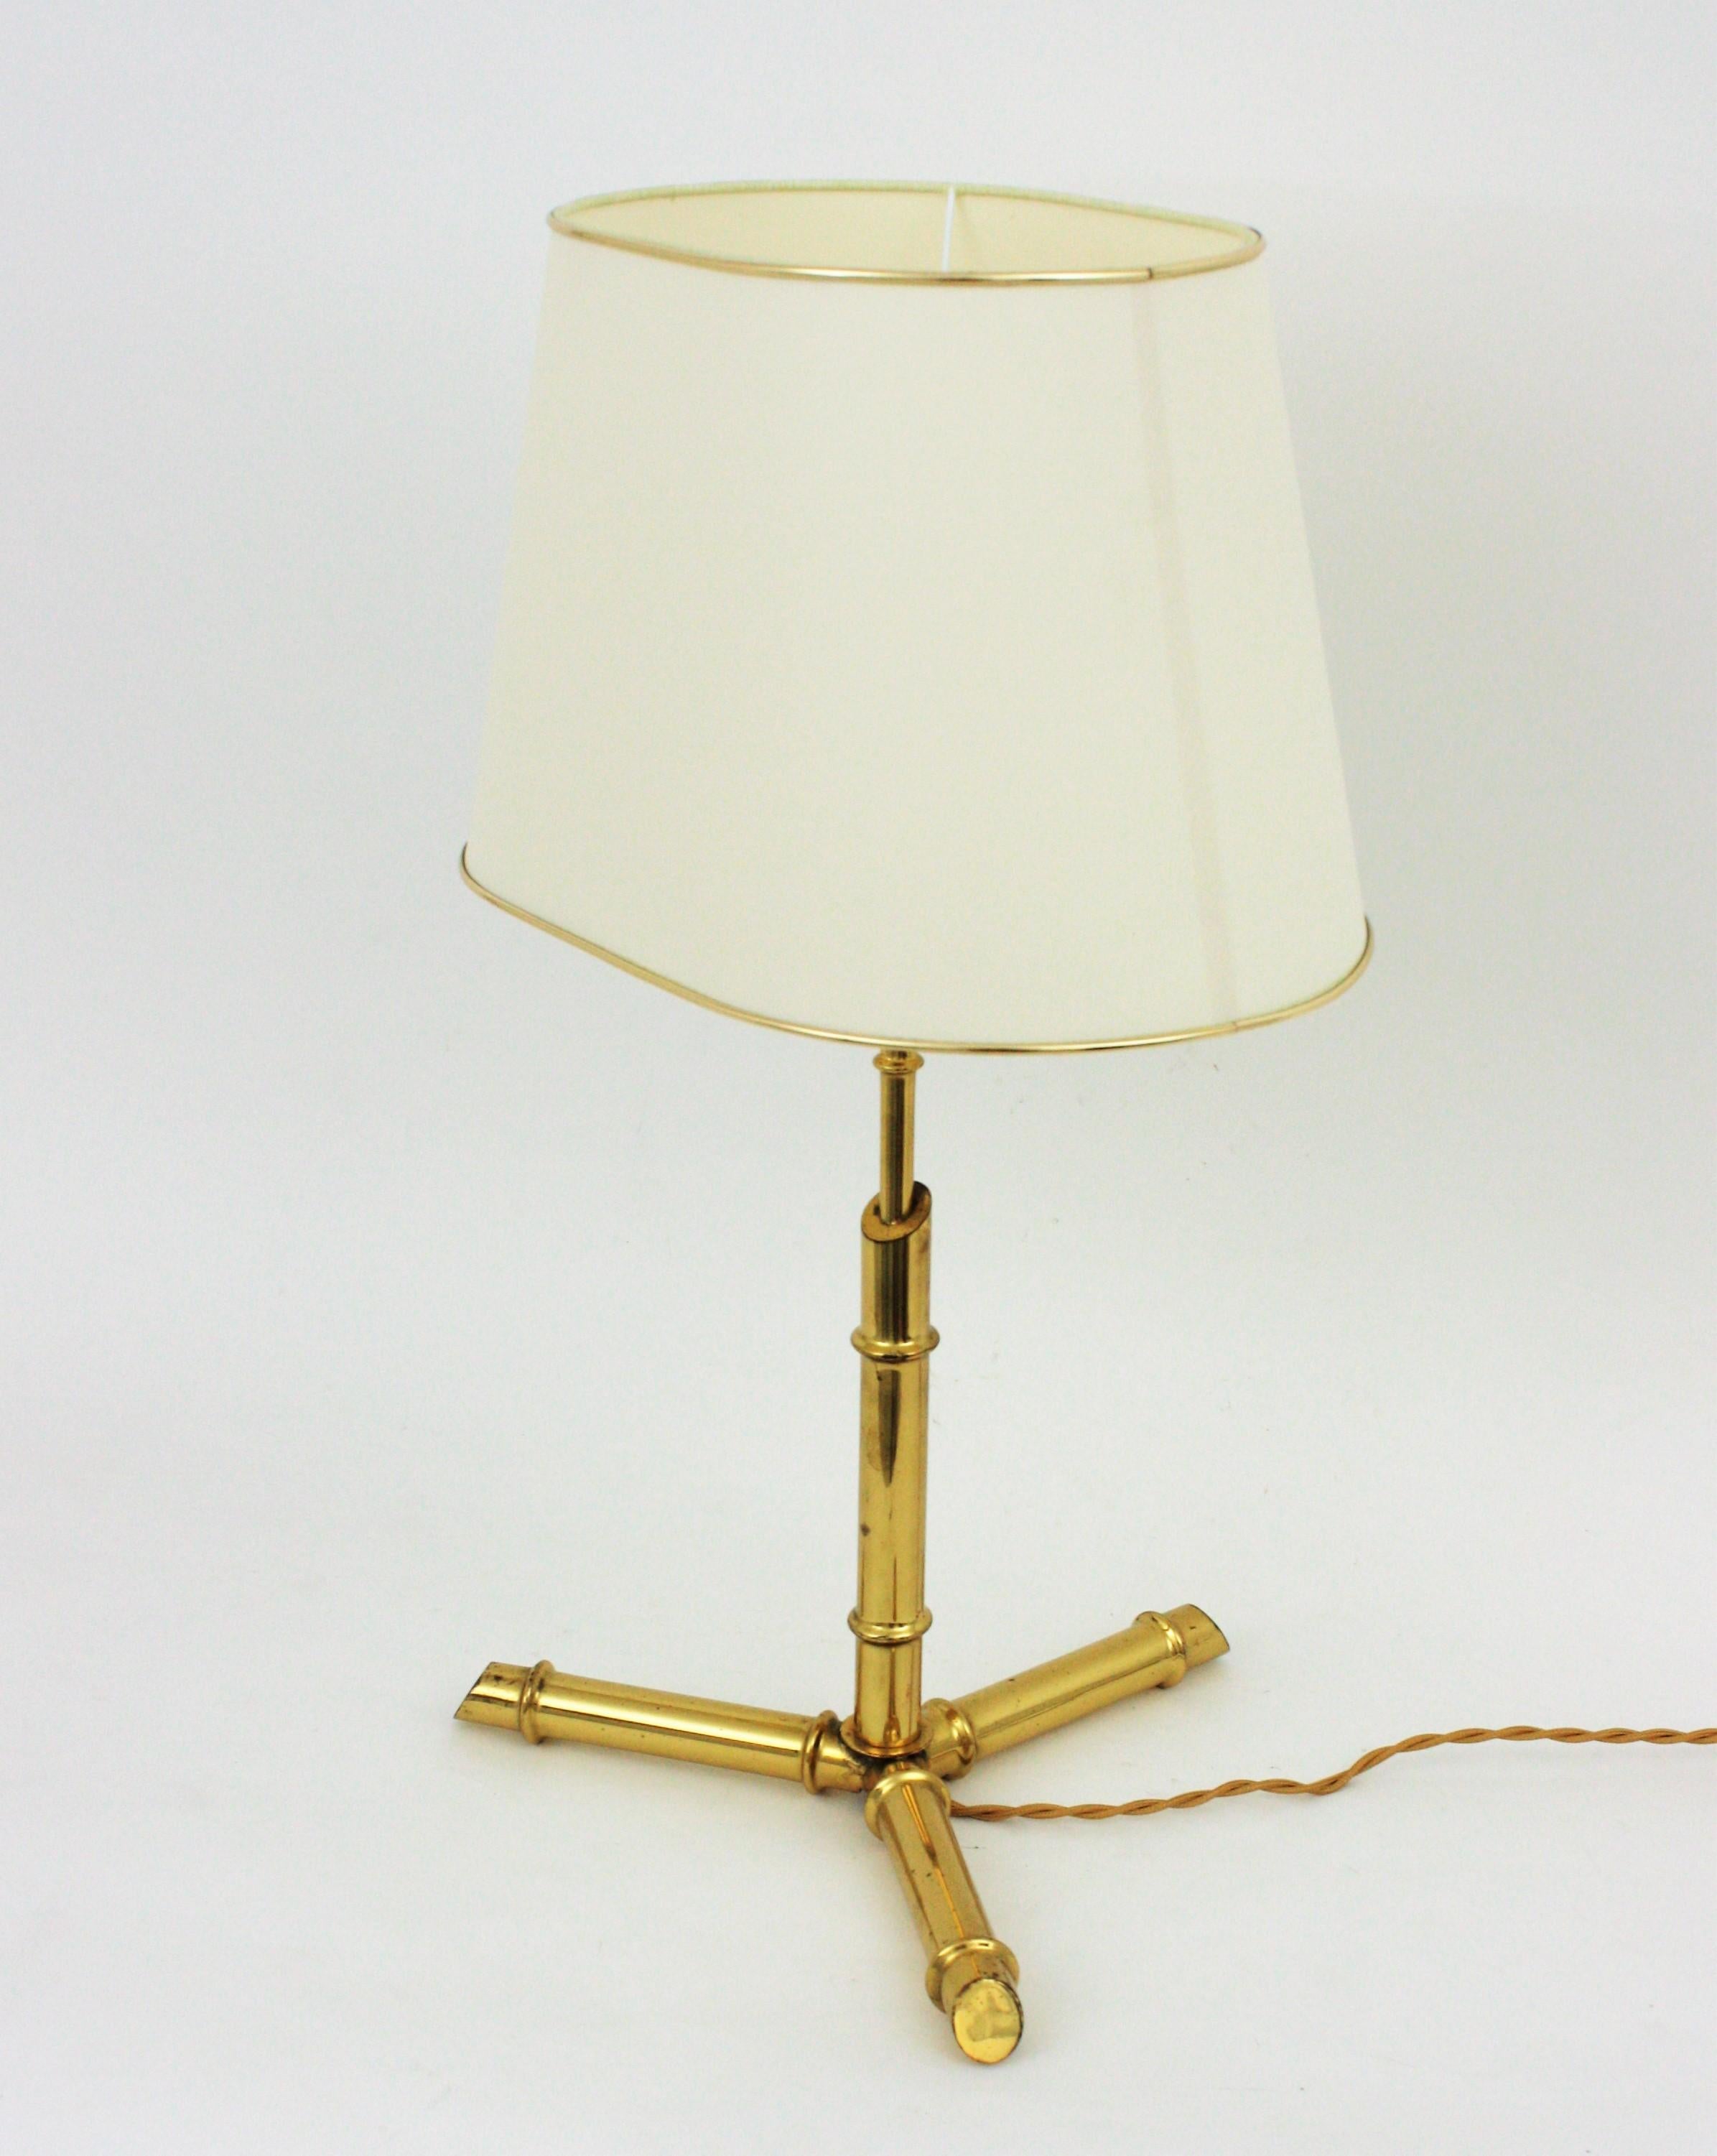 Italian Faux Bamboo Tripod Table Lamp in Brass, 1970s For Sale 5